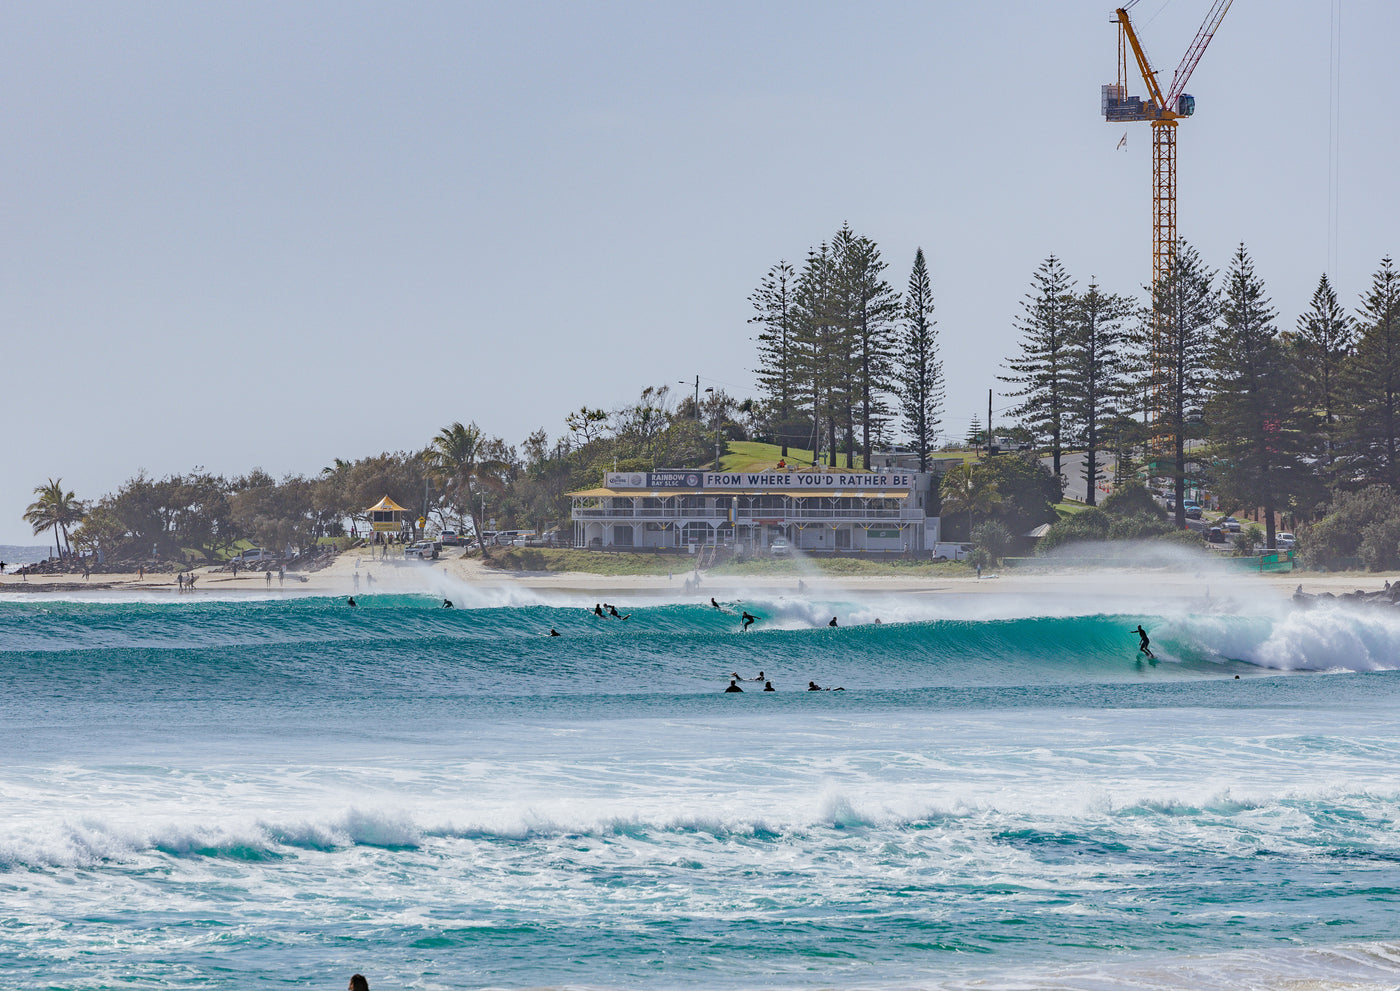 From where you'd rather be, Snapper Rocks